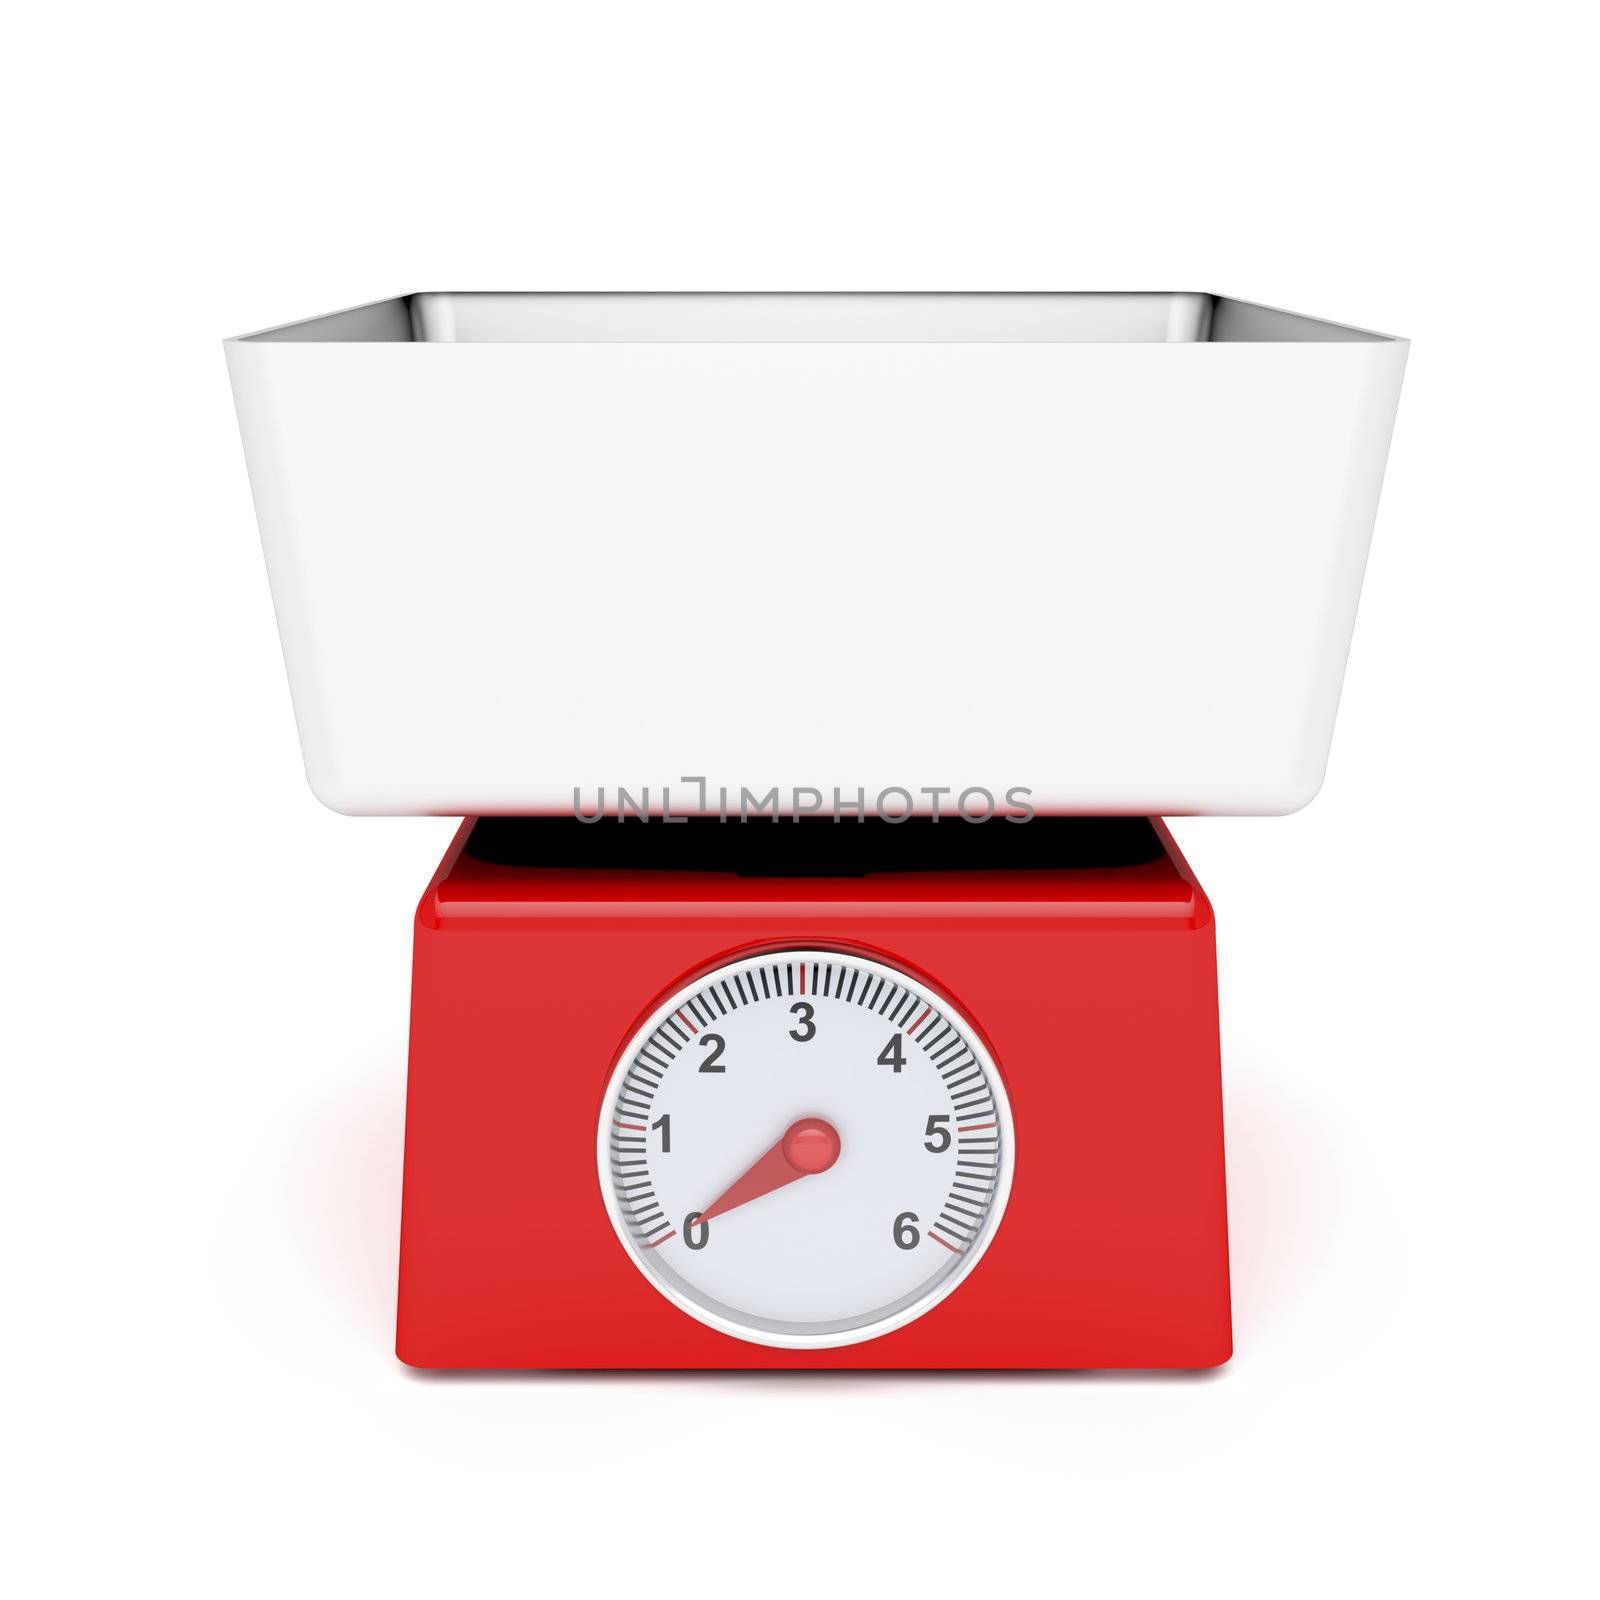 Retro kitchen weight scale by magraphics